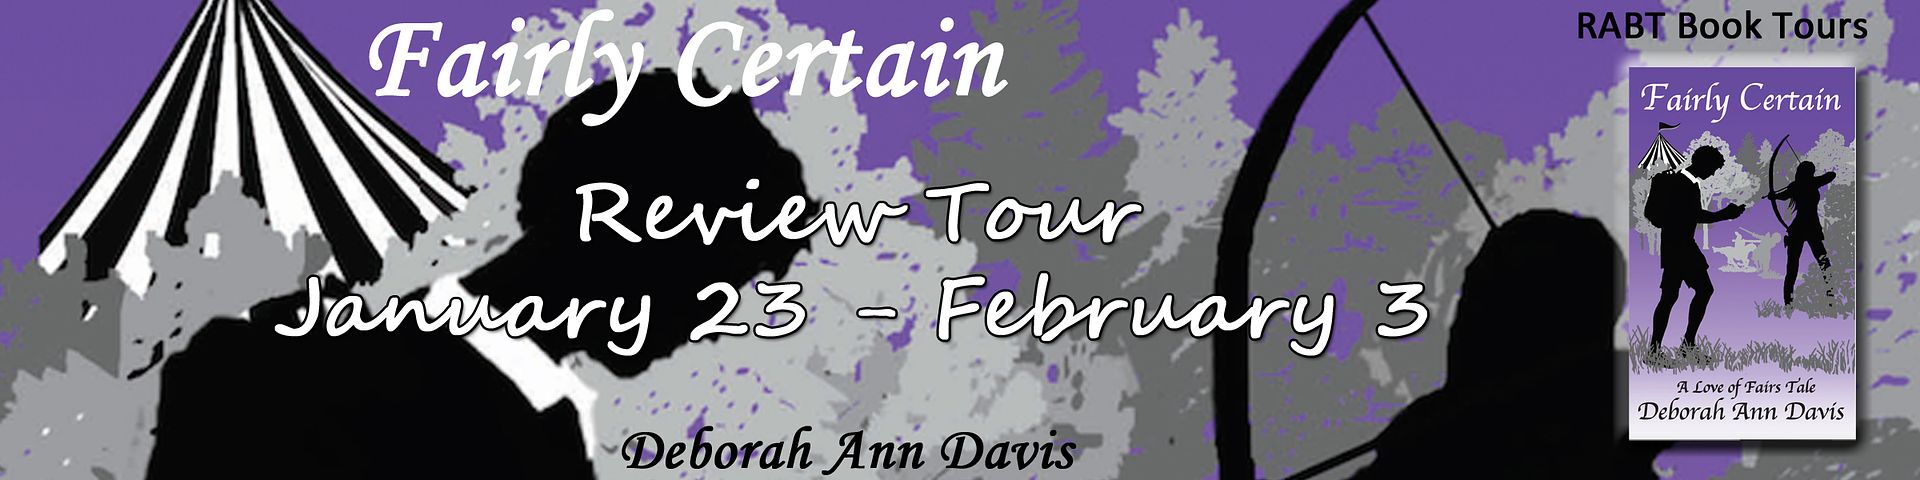 Blog Tour: Fairly Certain by @WiggleWriter and @DeborahAnnDavis with my #review